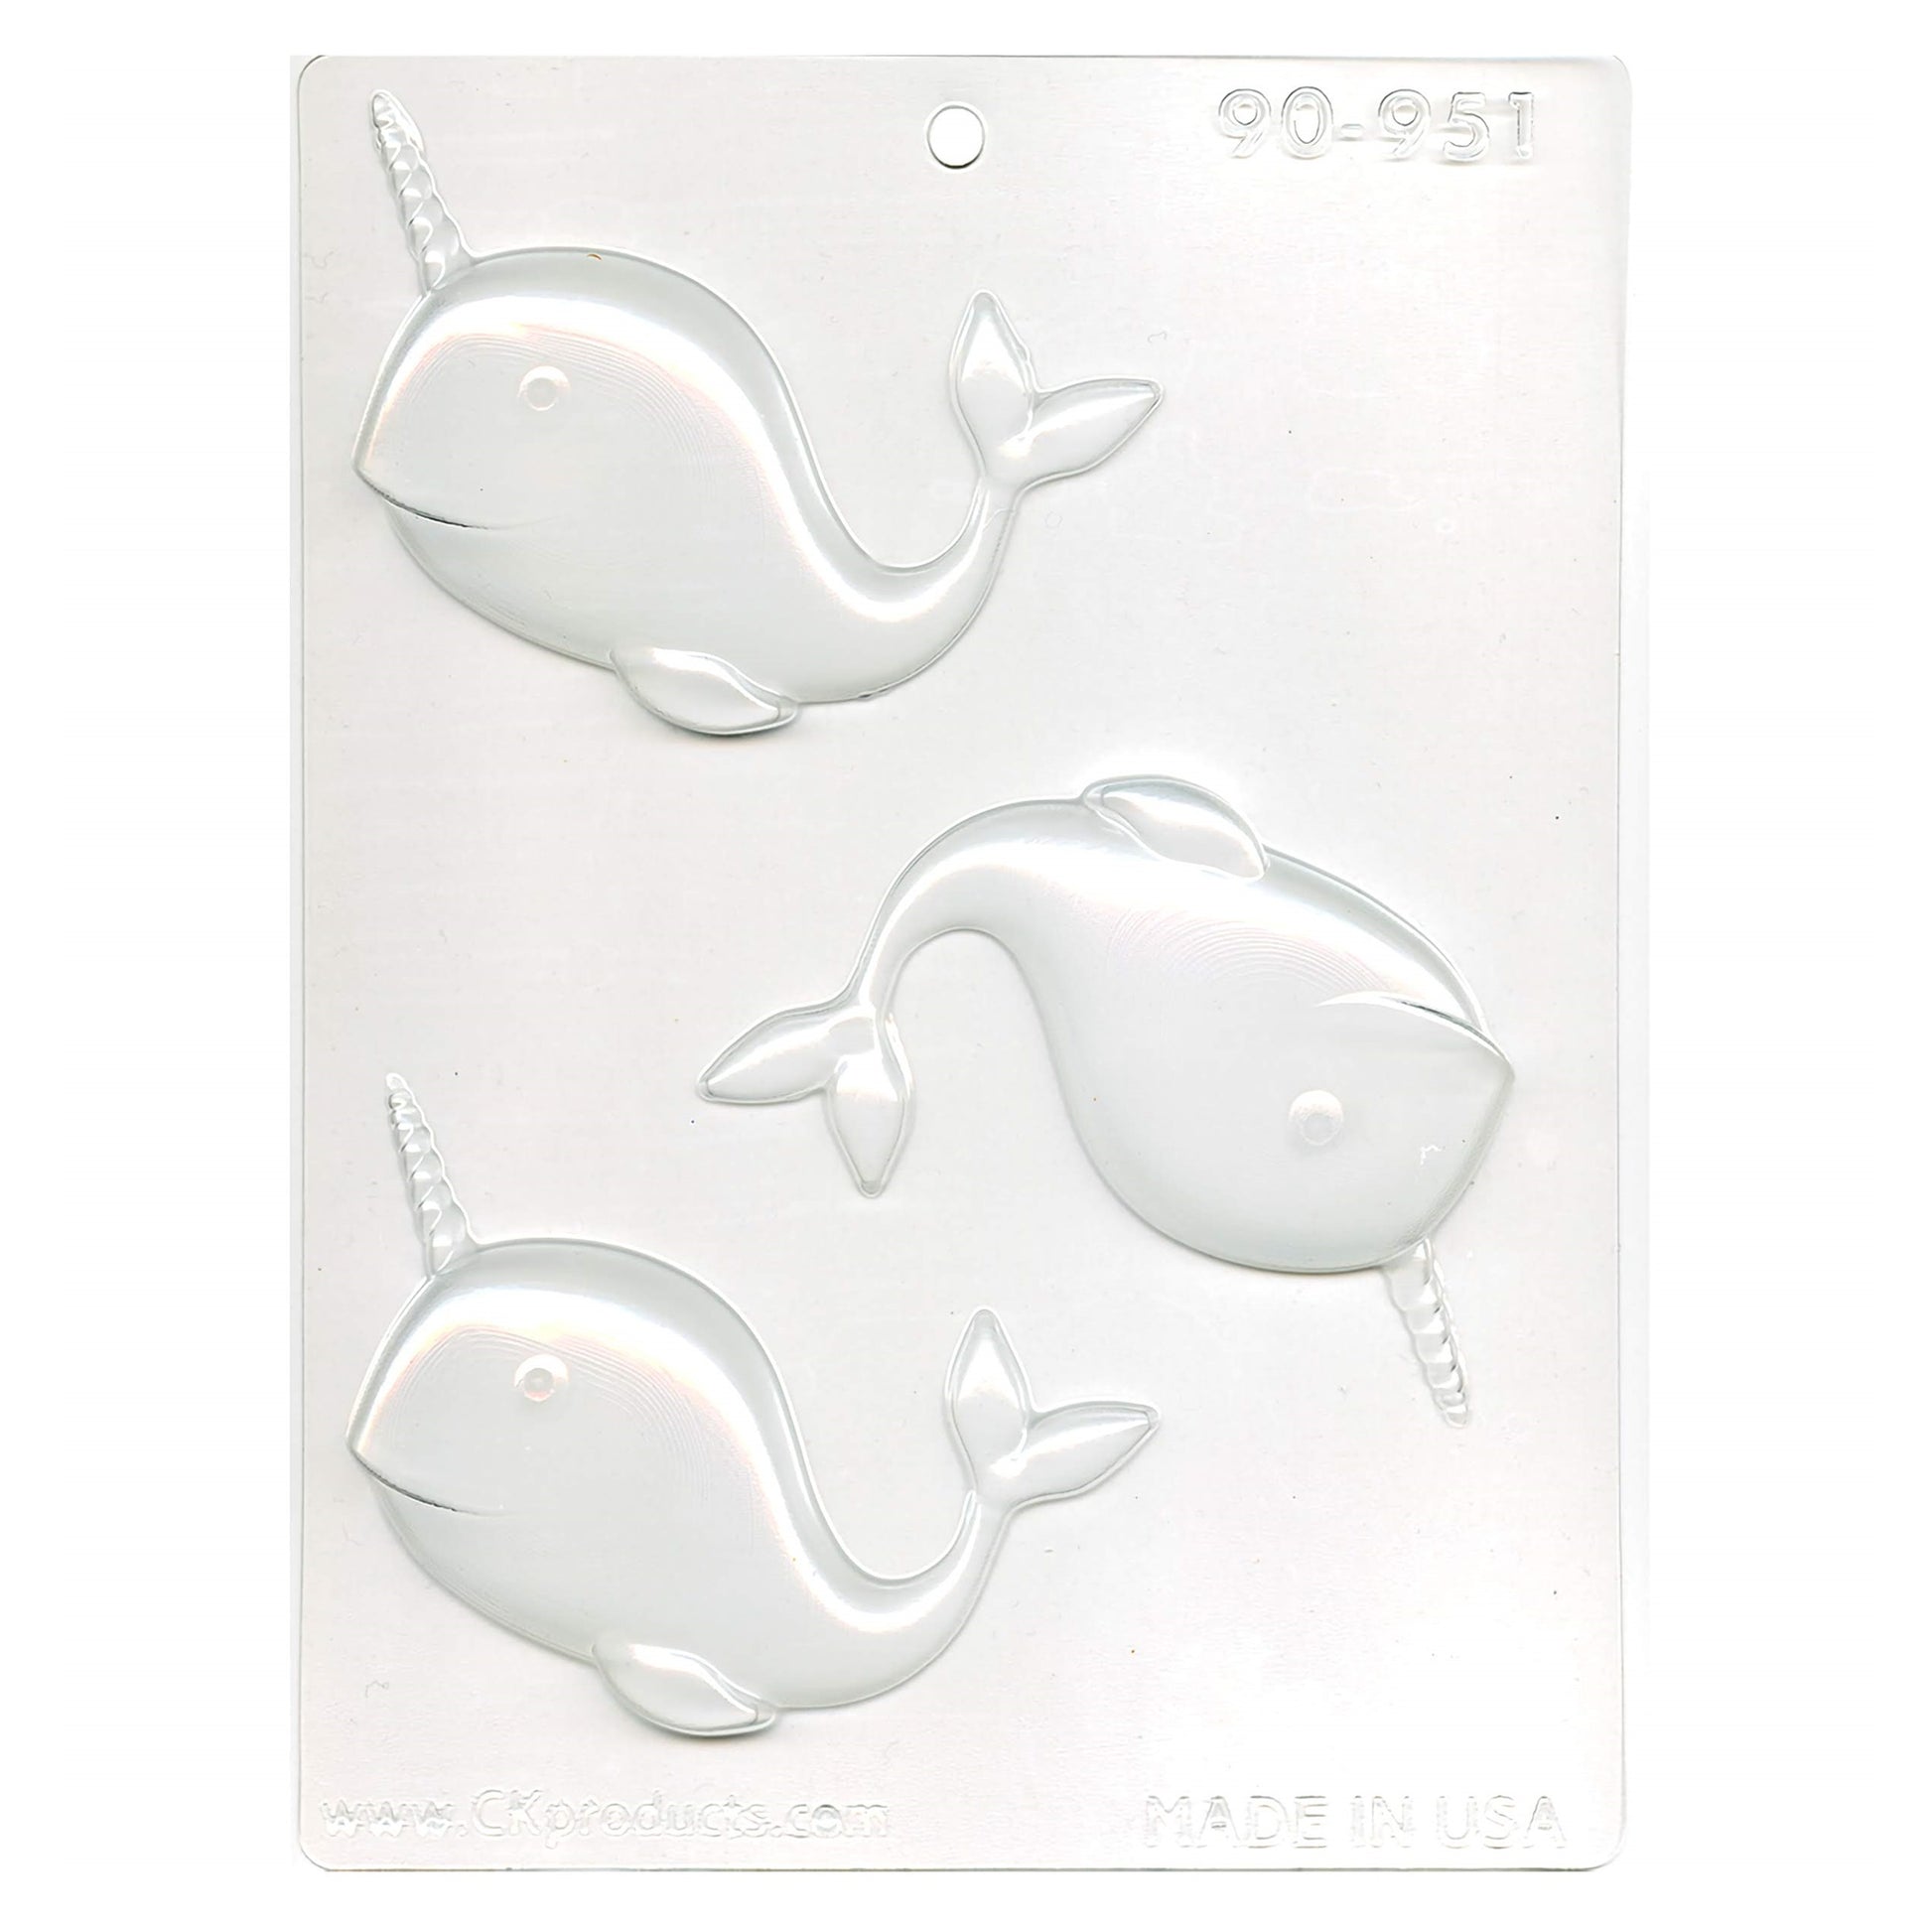 A clear plastic chocolate mold for creating narwhal-shaped treats, with three cavities each featuring the whimsical sea creature complete with a prominent tusk.